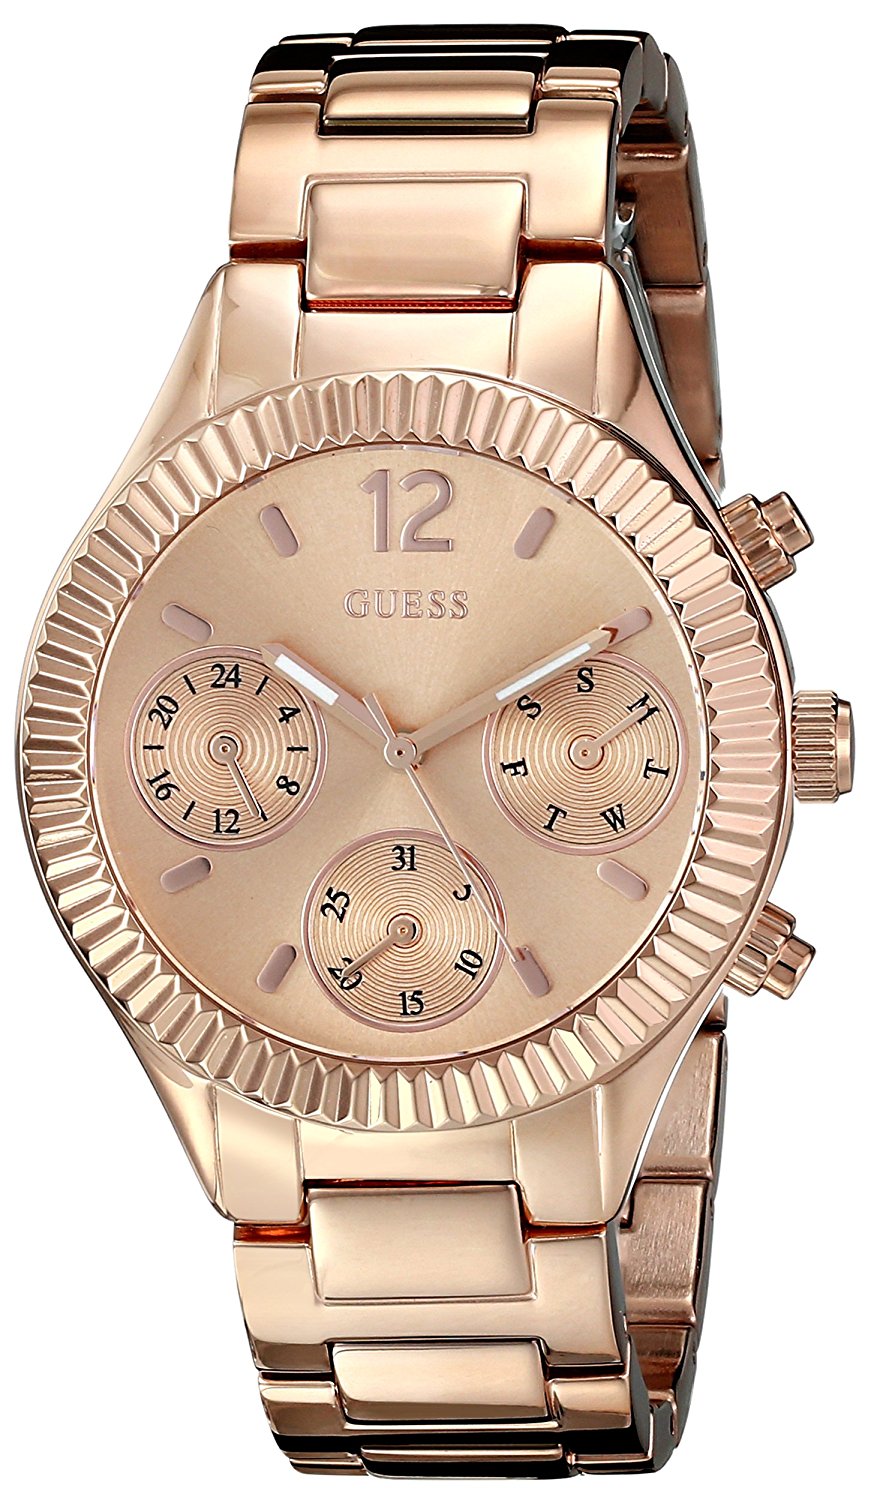 Đồng hồ GUESS Women's U0323L3 Mid-Size Rose Gold-Tone Multi-Function Watch